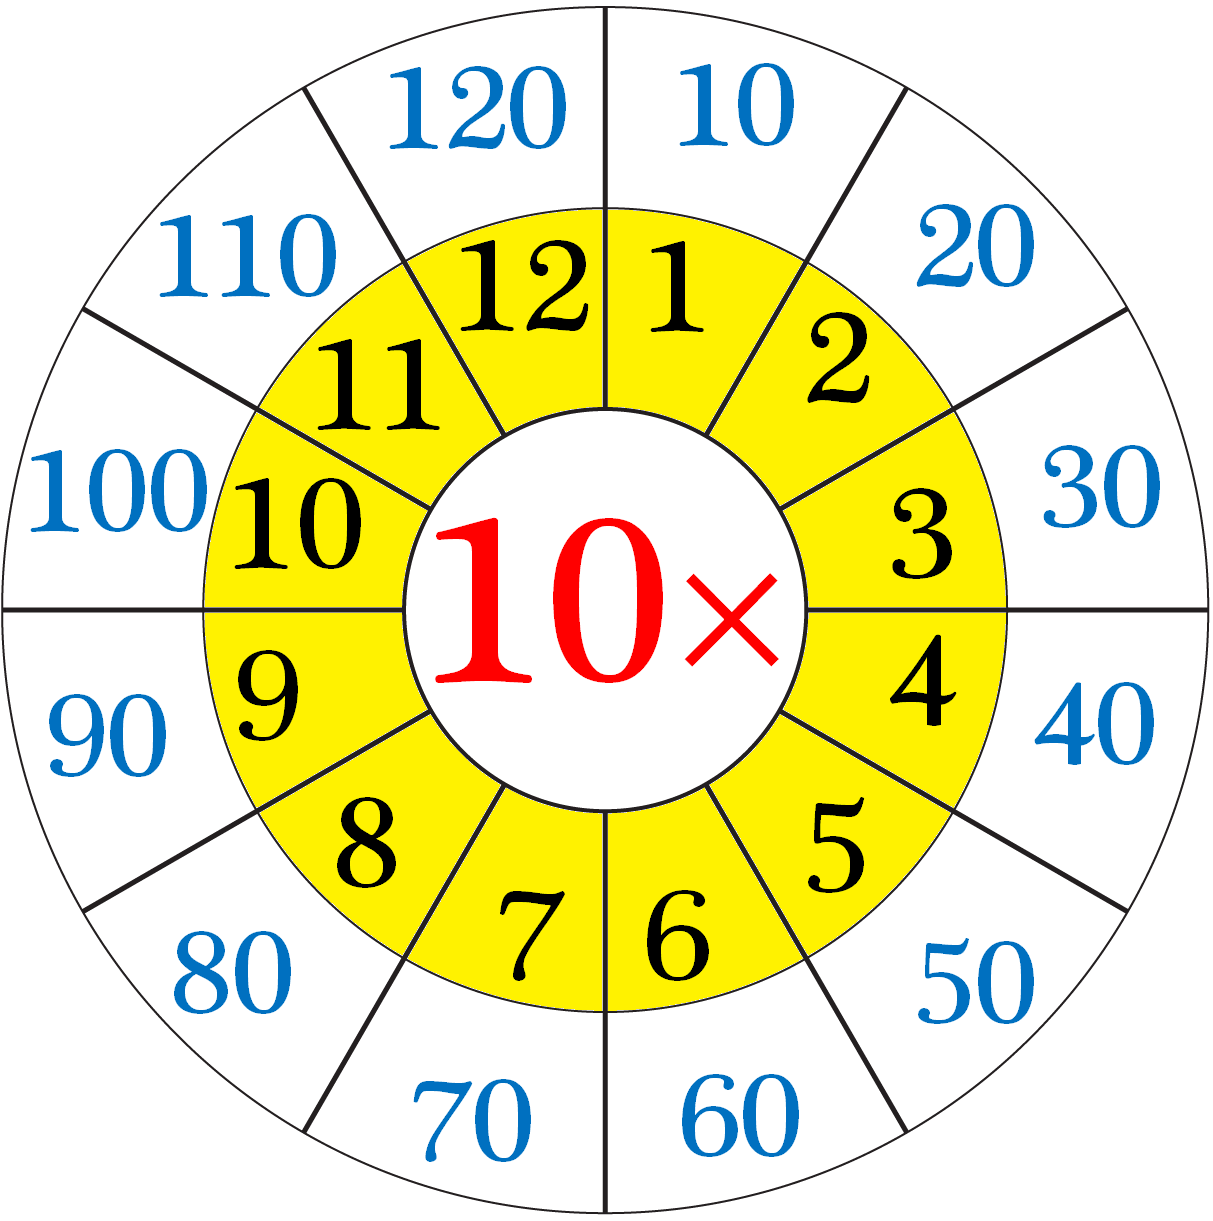 Multiplication Table Of 10 10 Times Table On Number Line Write The Table Of Ten